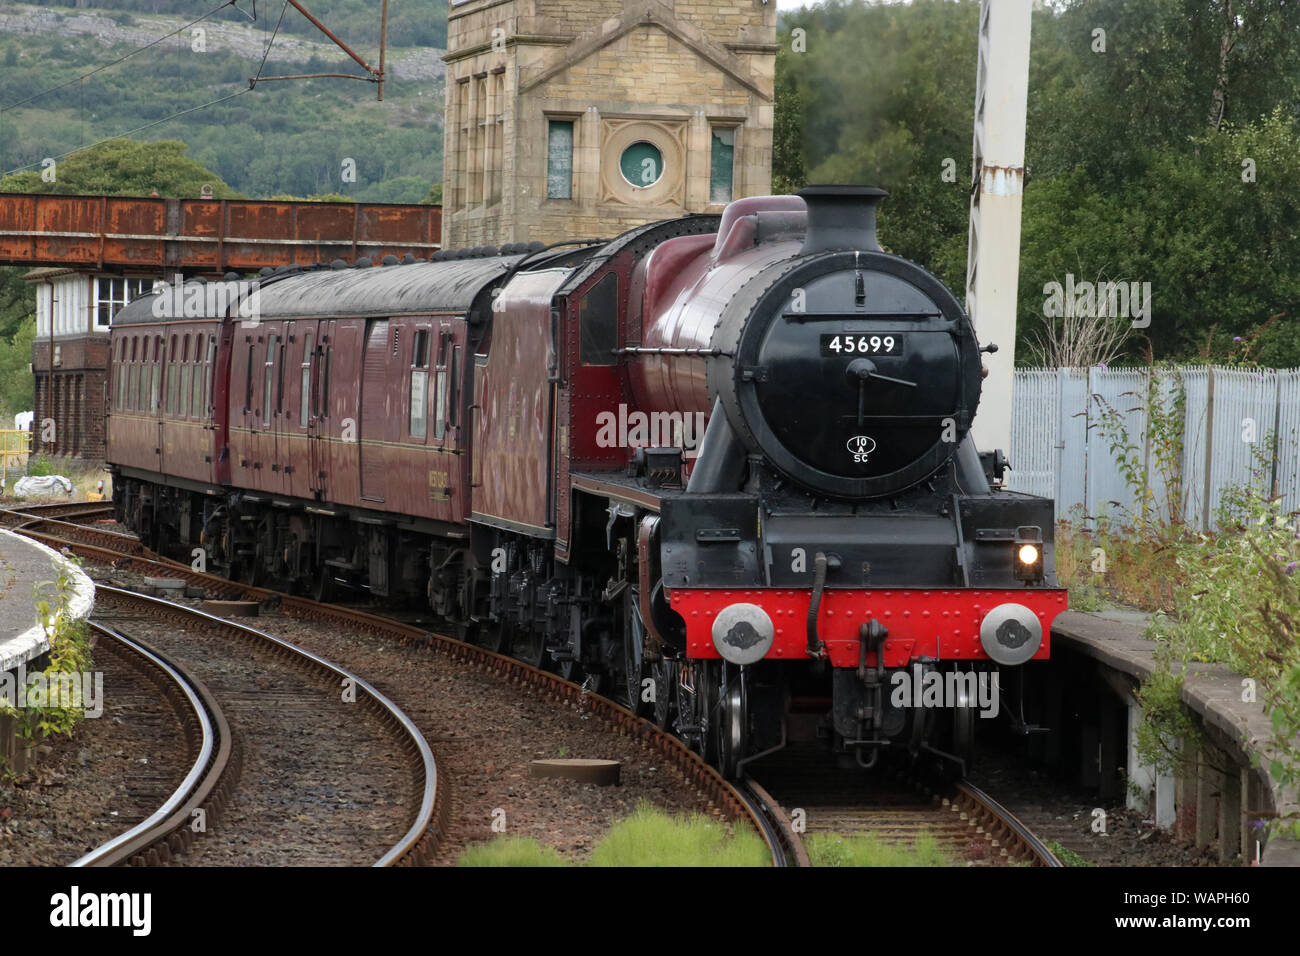 Preserved Stanier Jubilee class steam locomotive 45699 Galatea arriving at Carnforth railway station with ecs working from York on 21st August 2019. Stock Photo